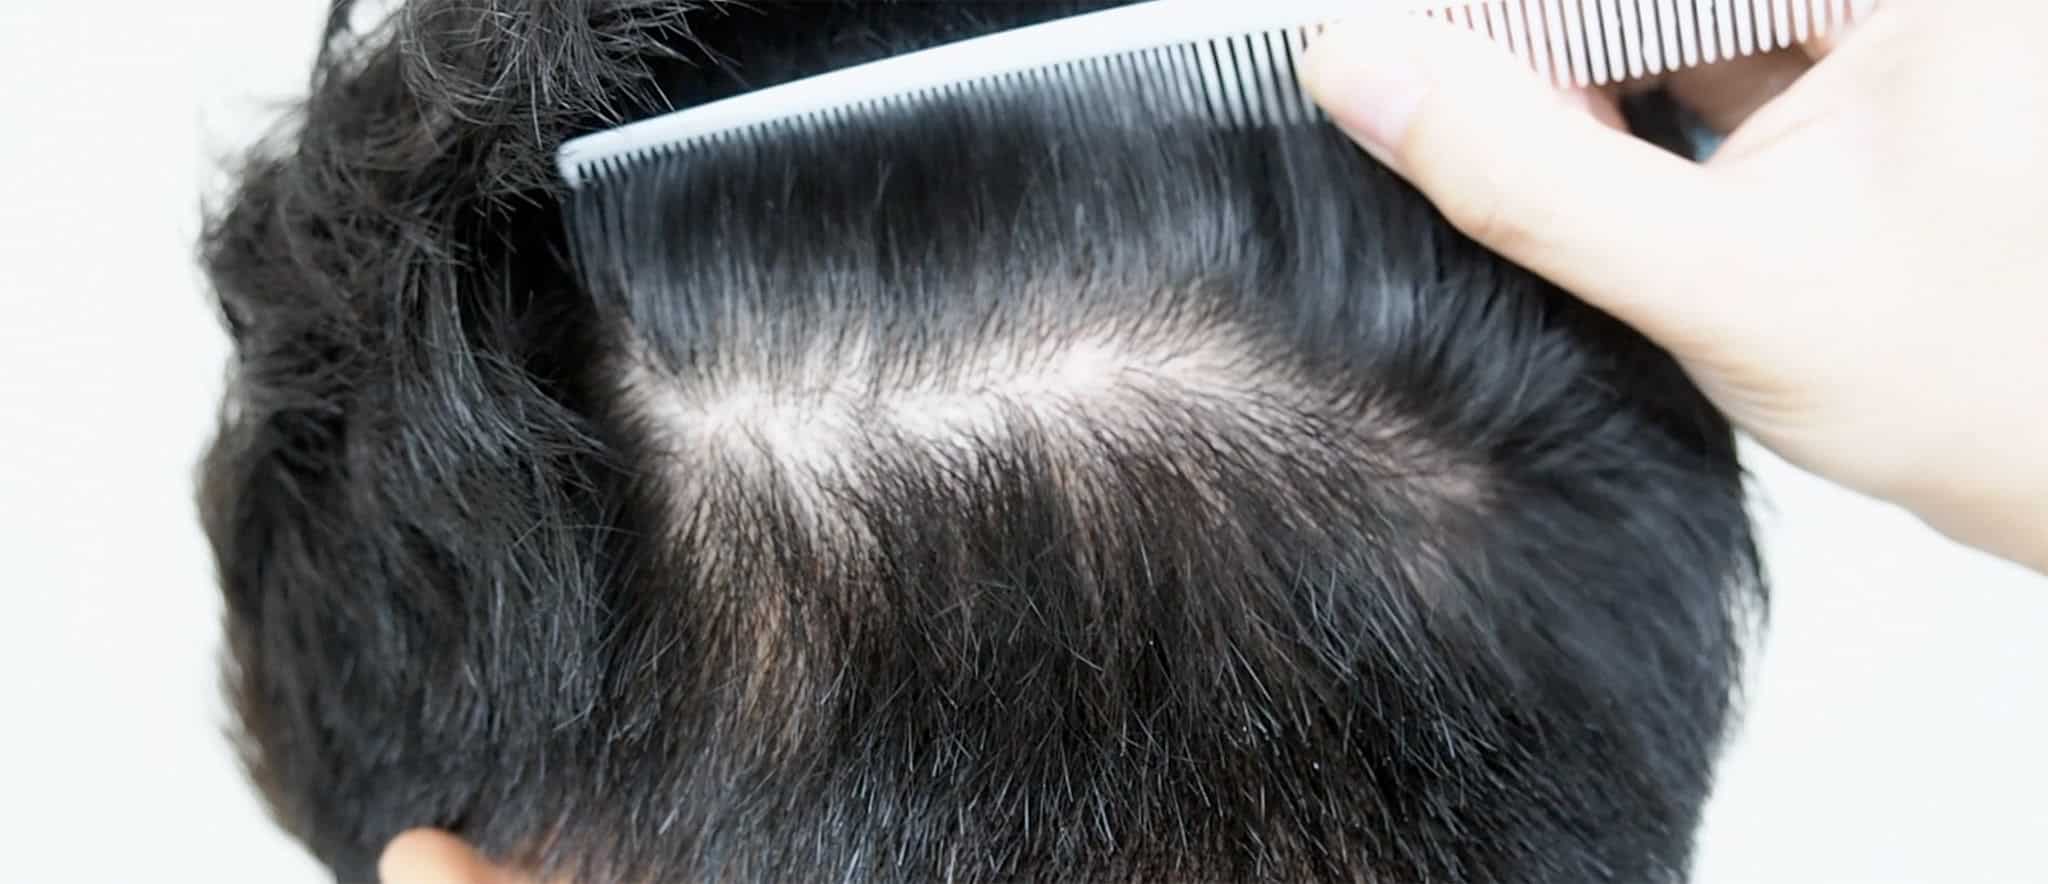 CARLESS HAIR TRANSPLANT SURGERY IS POSSIBLE? 1